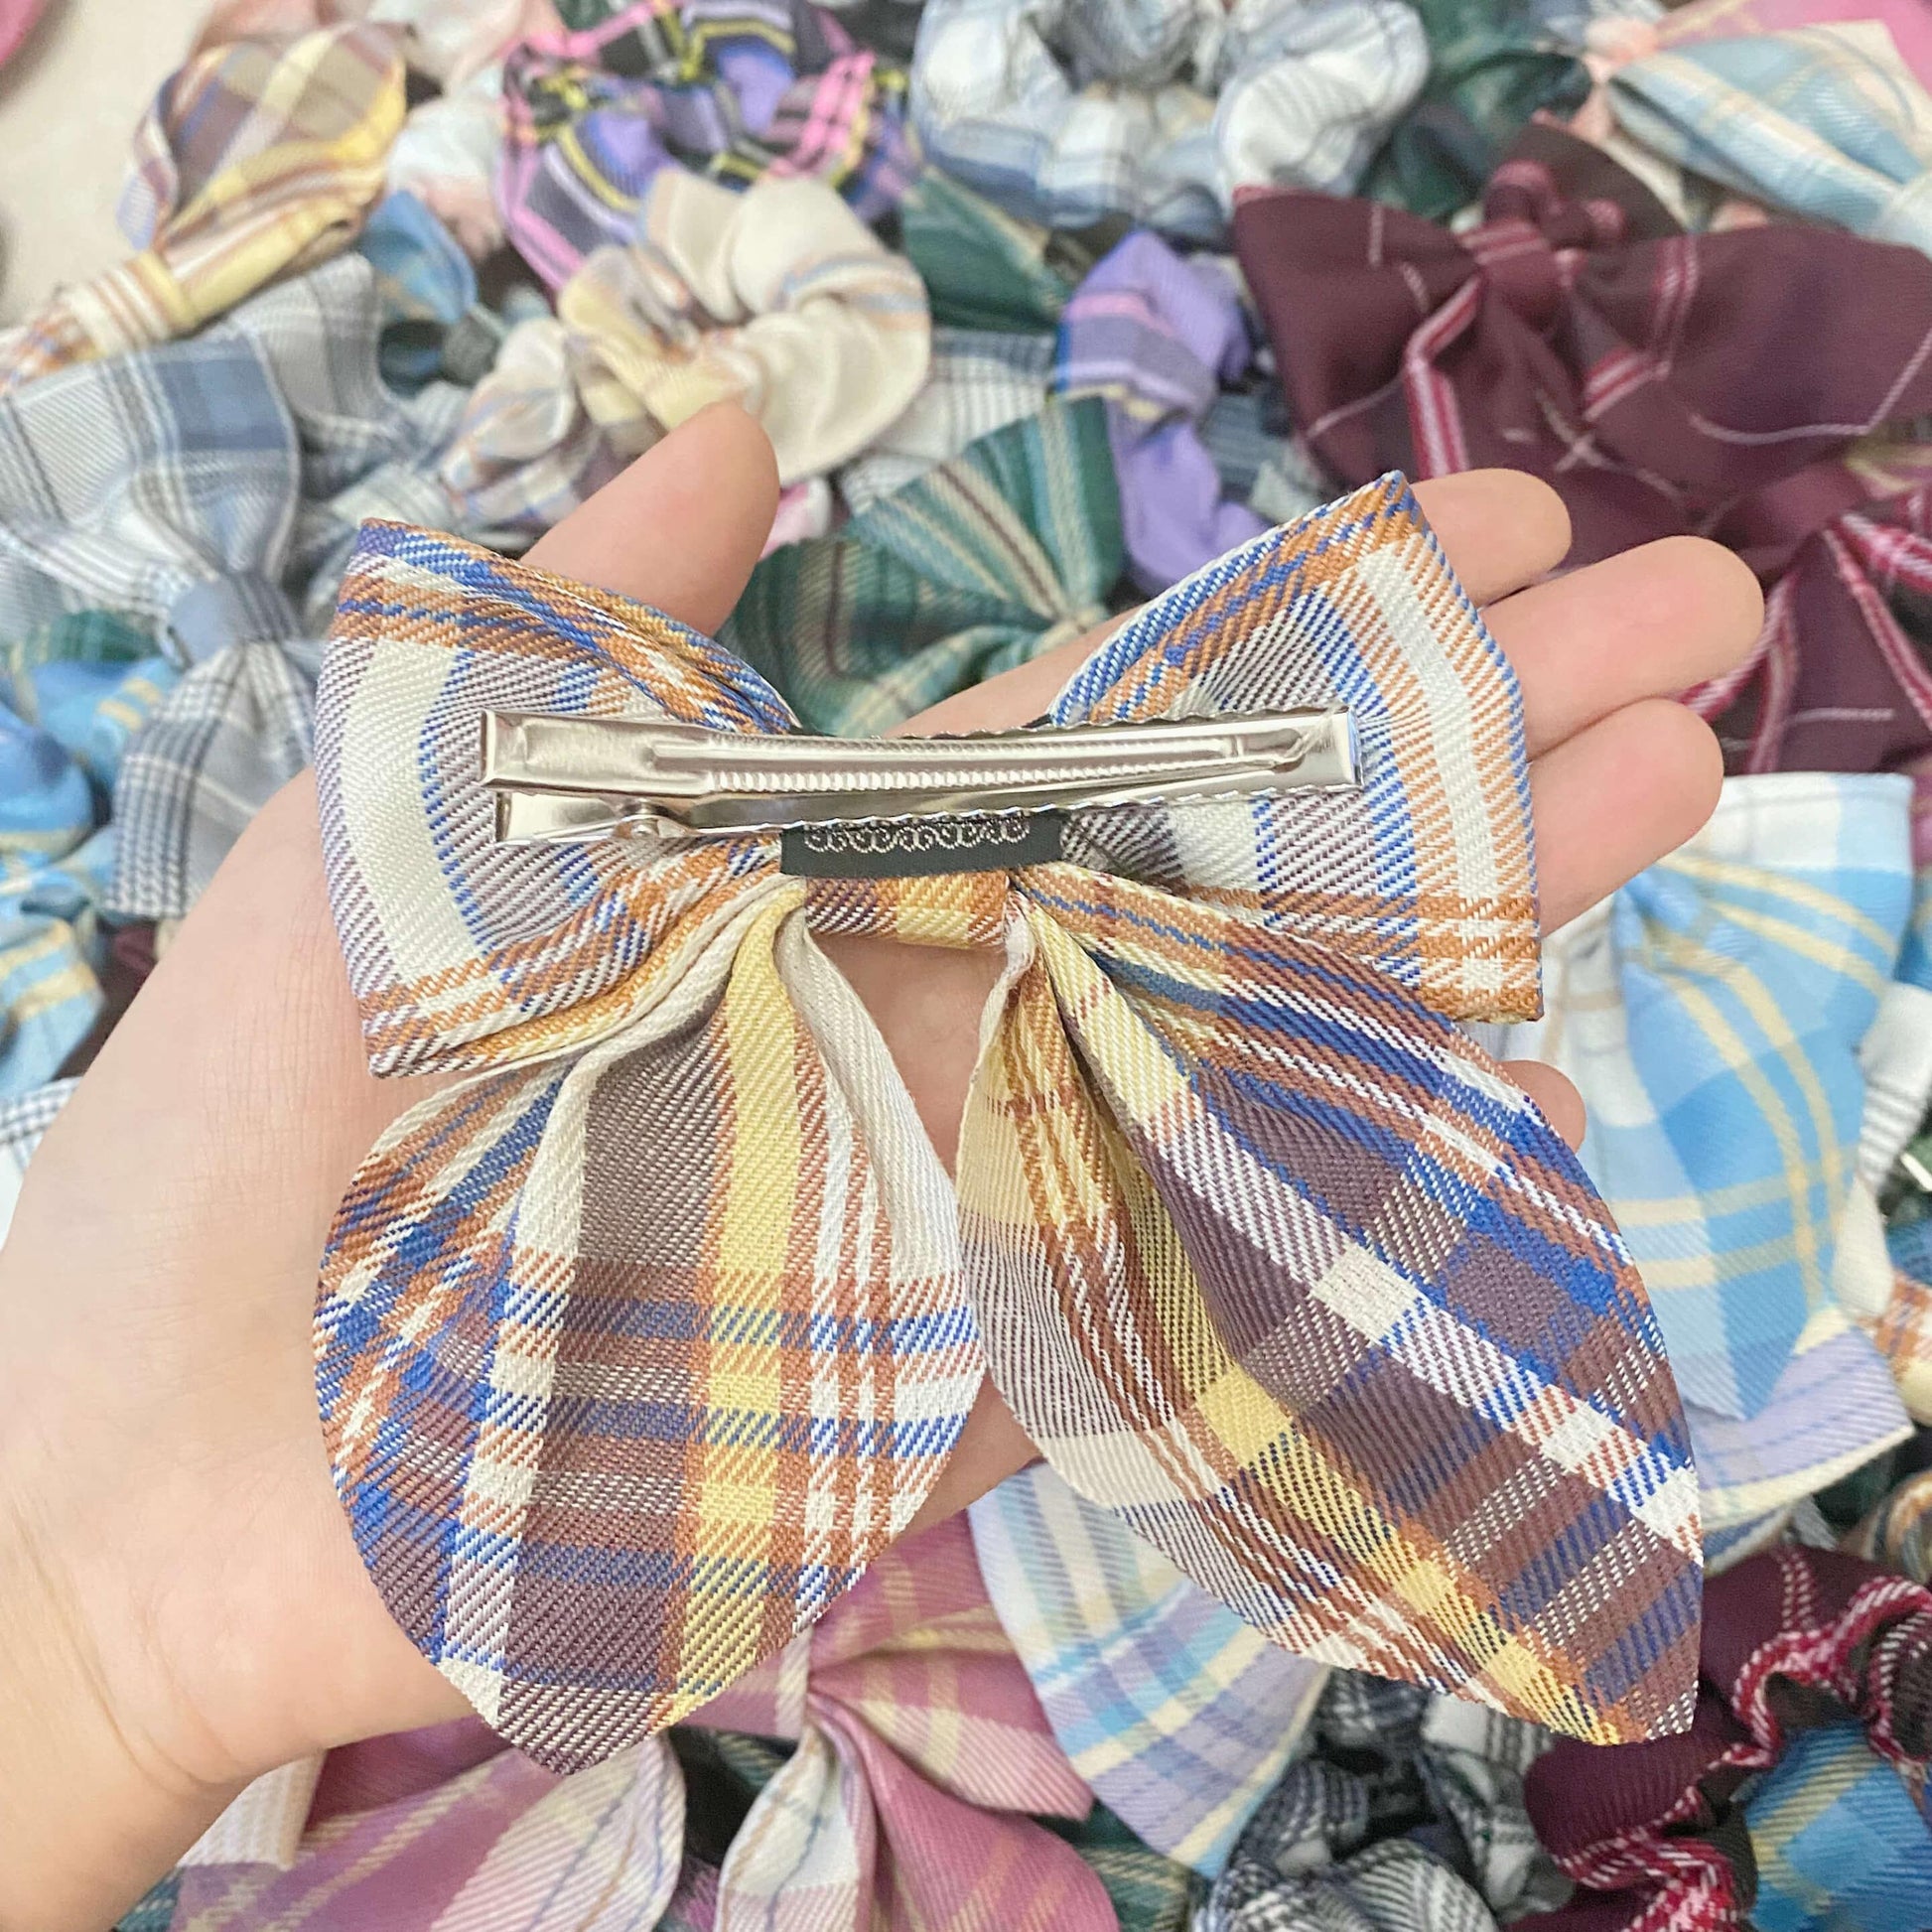 [SCOOPING TIME] 1 Big Scoop of JK Plaid Designs Scrunchies/Hair Bows/Hair Ties/Hair Clips Mix Pack-SURPRISE ELEMENTS NEWLY ADDED! - Belle Rose Nails